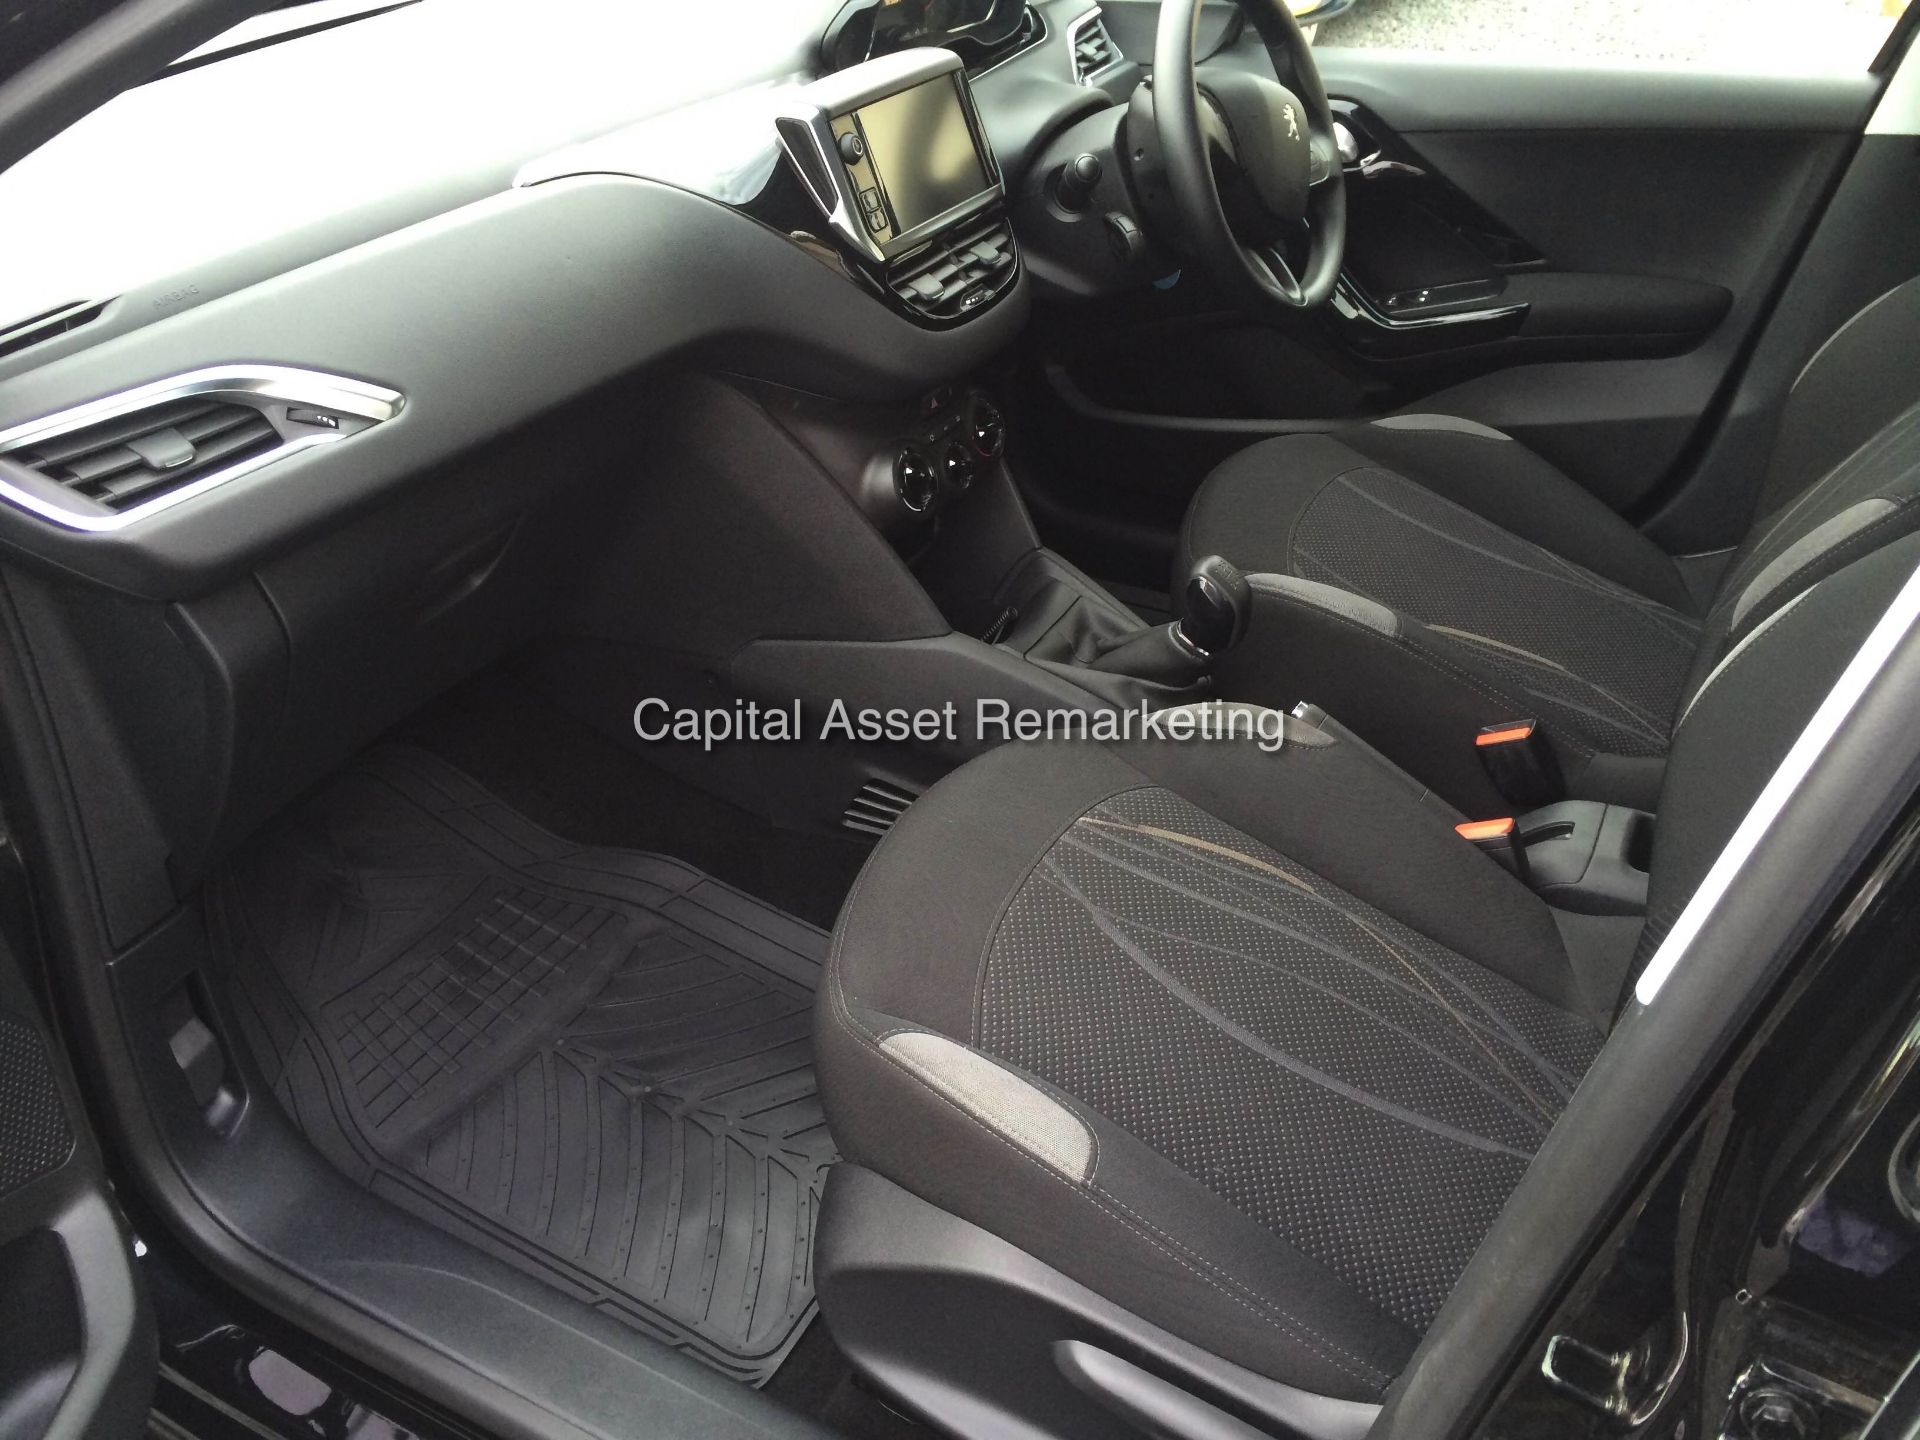 PEUGEOT 208 1.4 HDI 'ACTIVE' 5 DOOR (2014 - 14 REG)  **OWNED BY PEUGEOT FROM NEW** - Image 9 of 15